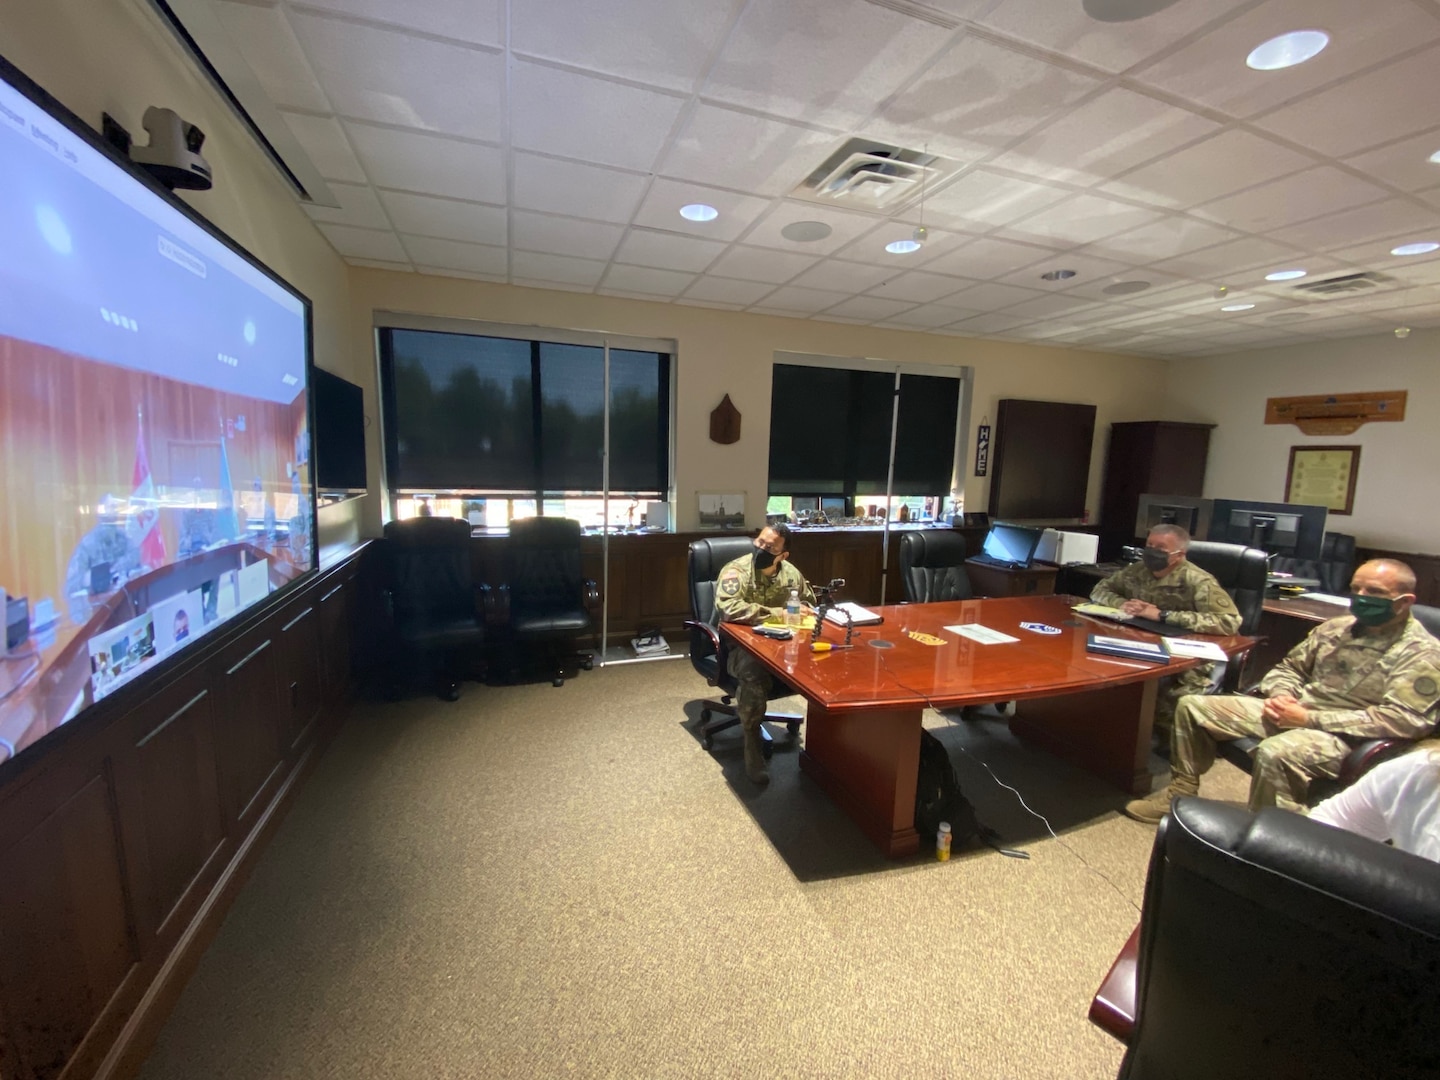 West Virginia National Guard Adjutant General, Maj. Gen. James Hoyer, alongside the Senior Enlisted Leader, Command Sgt. Maj. Phillip Cantrell, participate in a video teleconference with the Peruvian Air Force (Fuerza Aérea del Perú (FAP)) commanding general, Rodolfo Garcia and staff July 21, 2020, from the WVNG Joint Forces Headquarters in Charleston, West Virginia. The purpose of this senior officer meeting was to share information, best practices and lessons learned on military response efforts to the current COVID-19 pandemic, as well as discuss plans for potential future engagements. (U.S. Army National Guard photo by Maj. Joshua Poling)